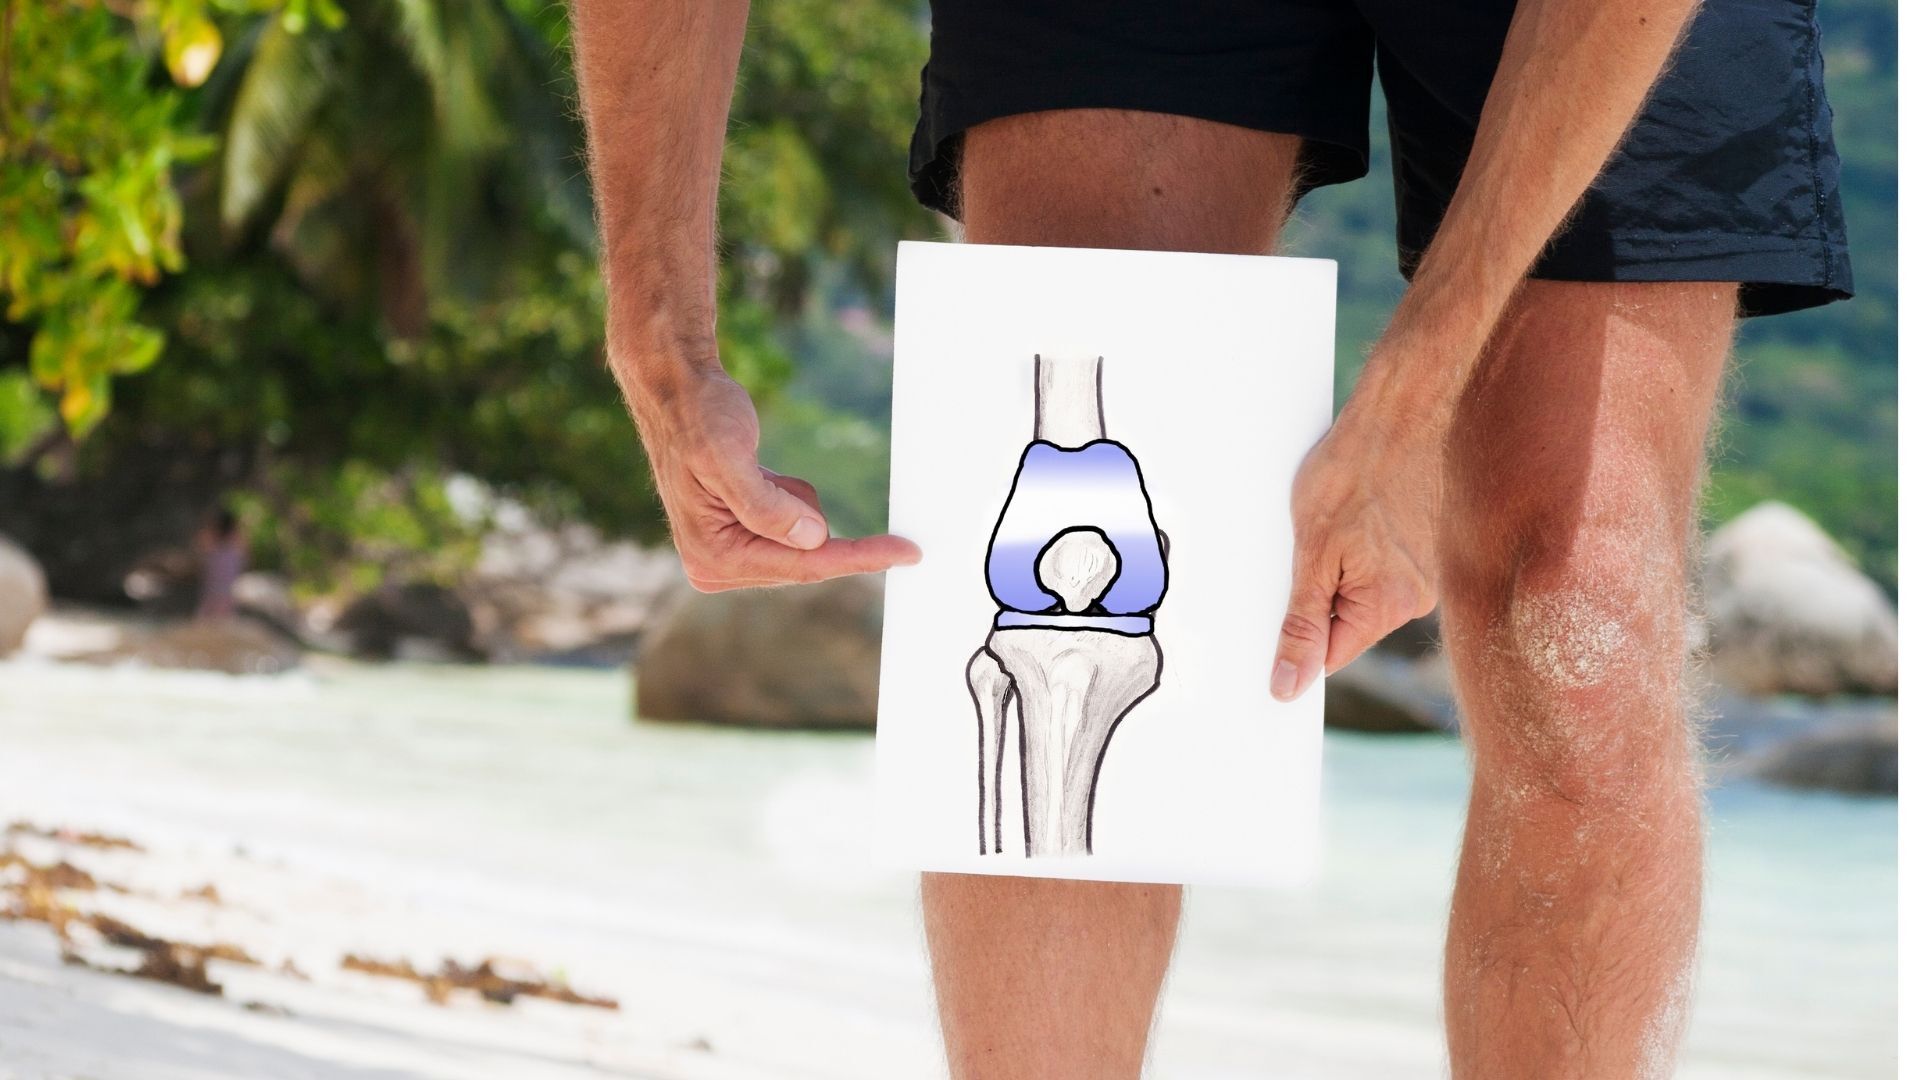 Knee Replacement Surgery Shown Through a Paper Diagram Over a Healthy Knee 